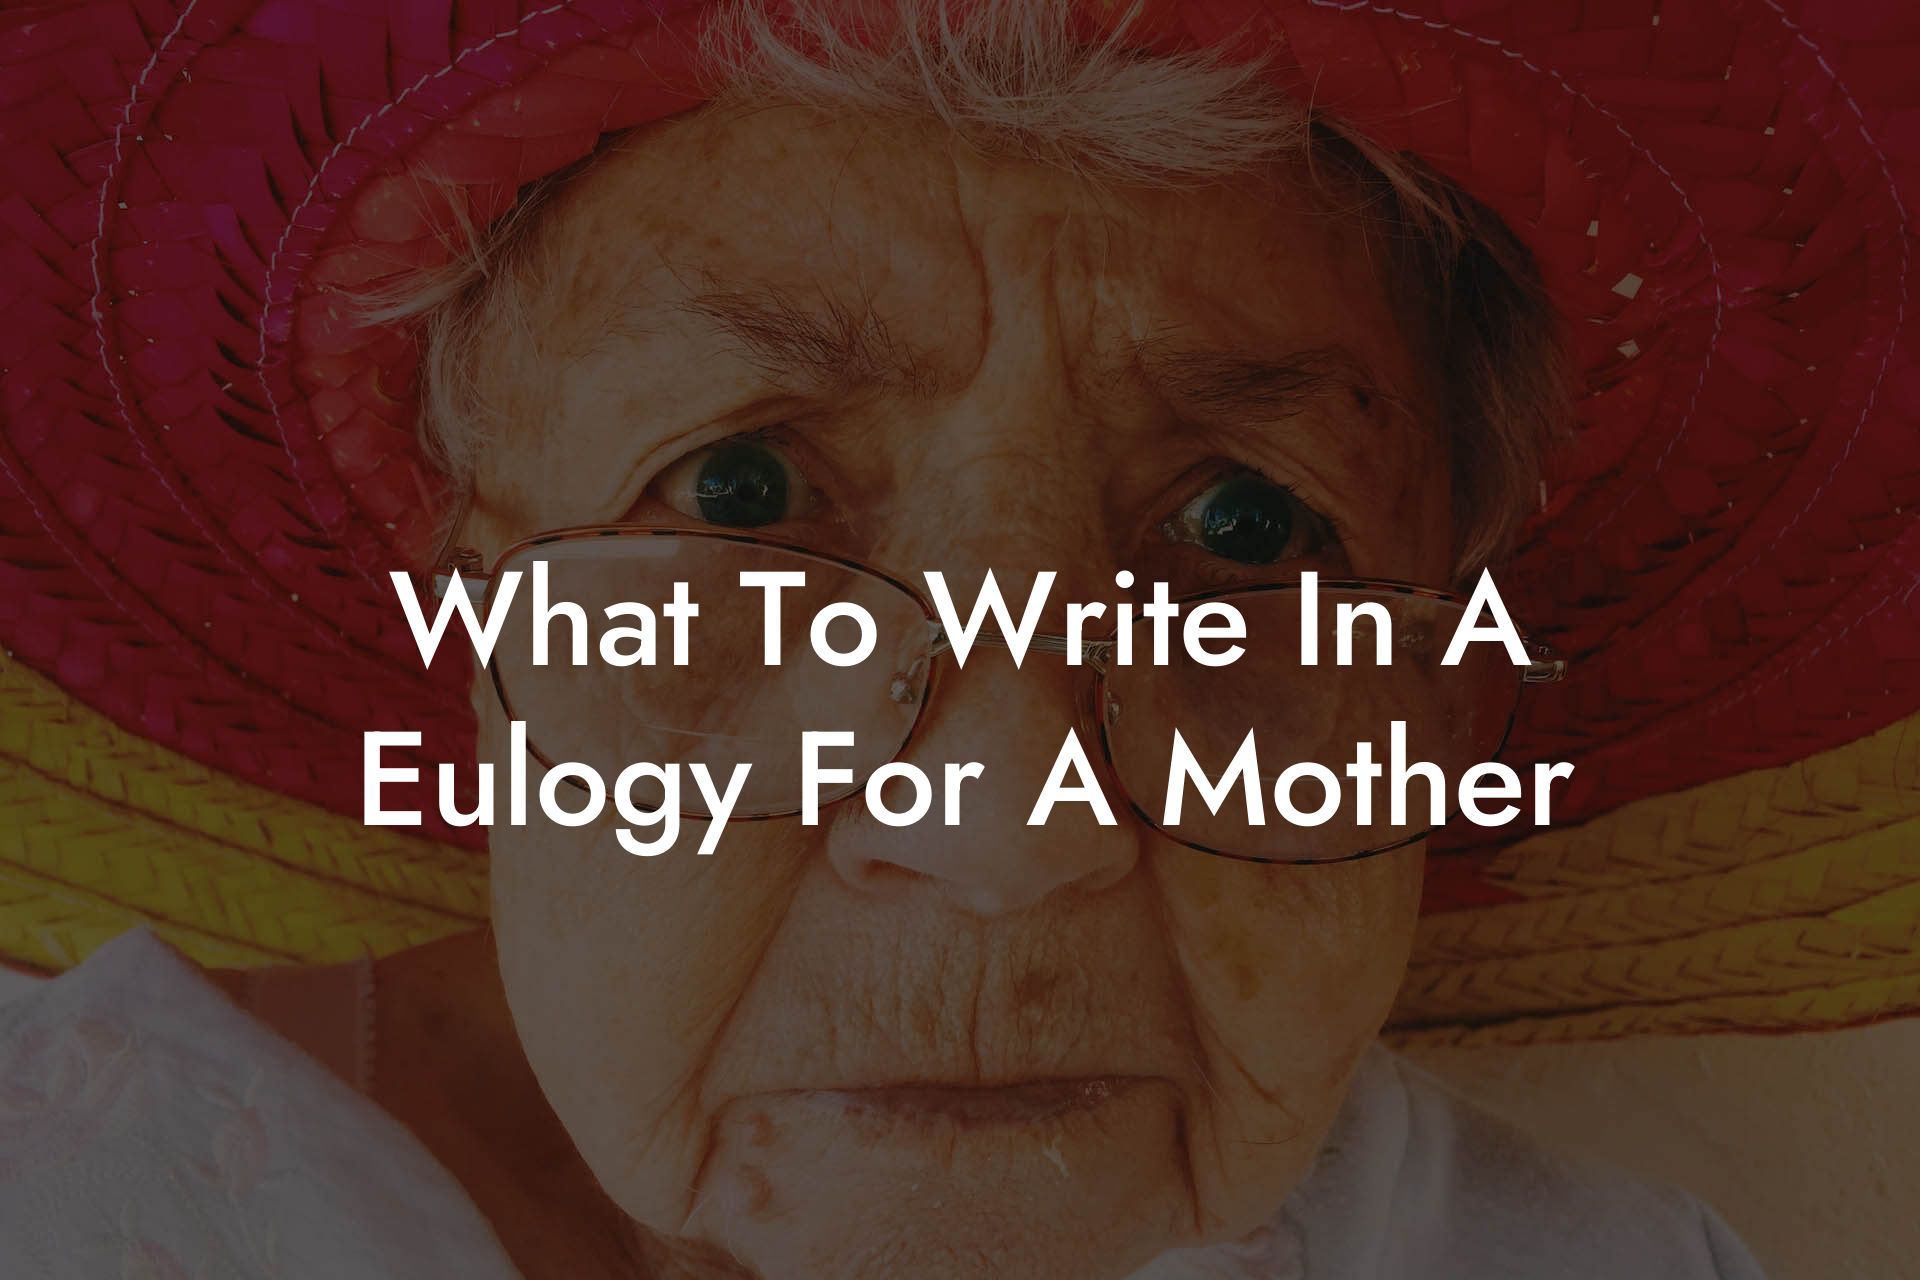 What To Write In A Eulogy For A Mother